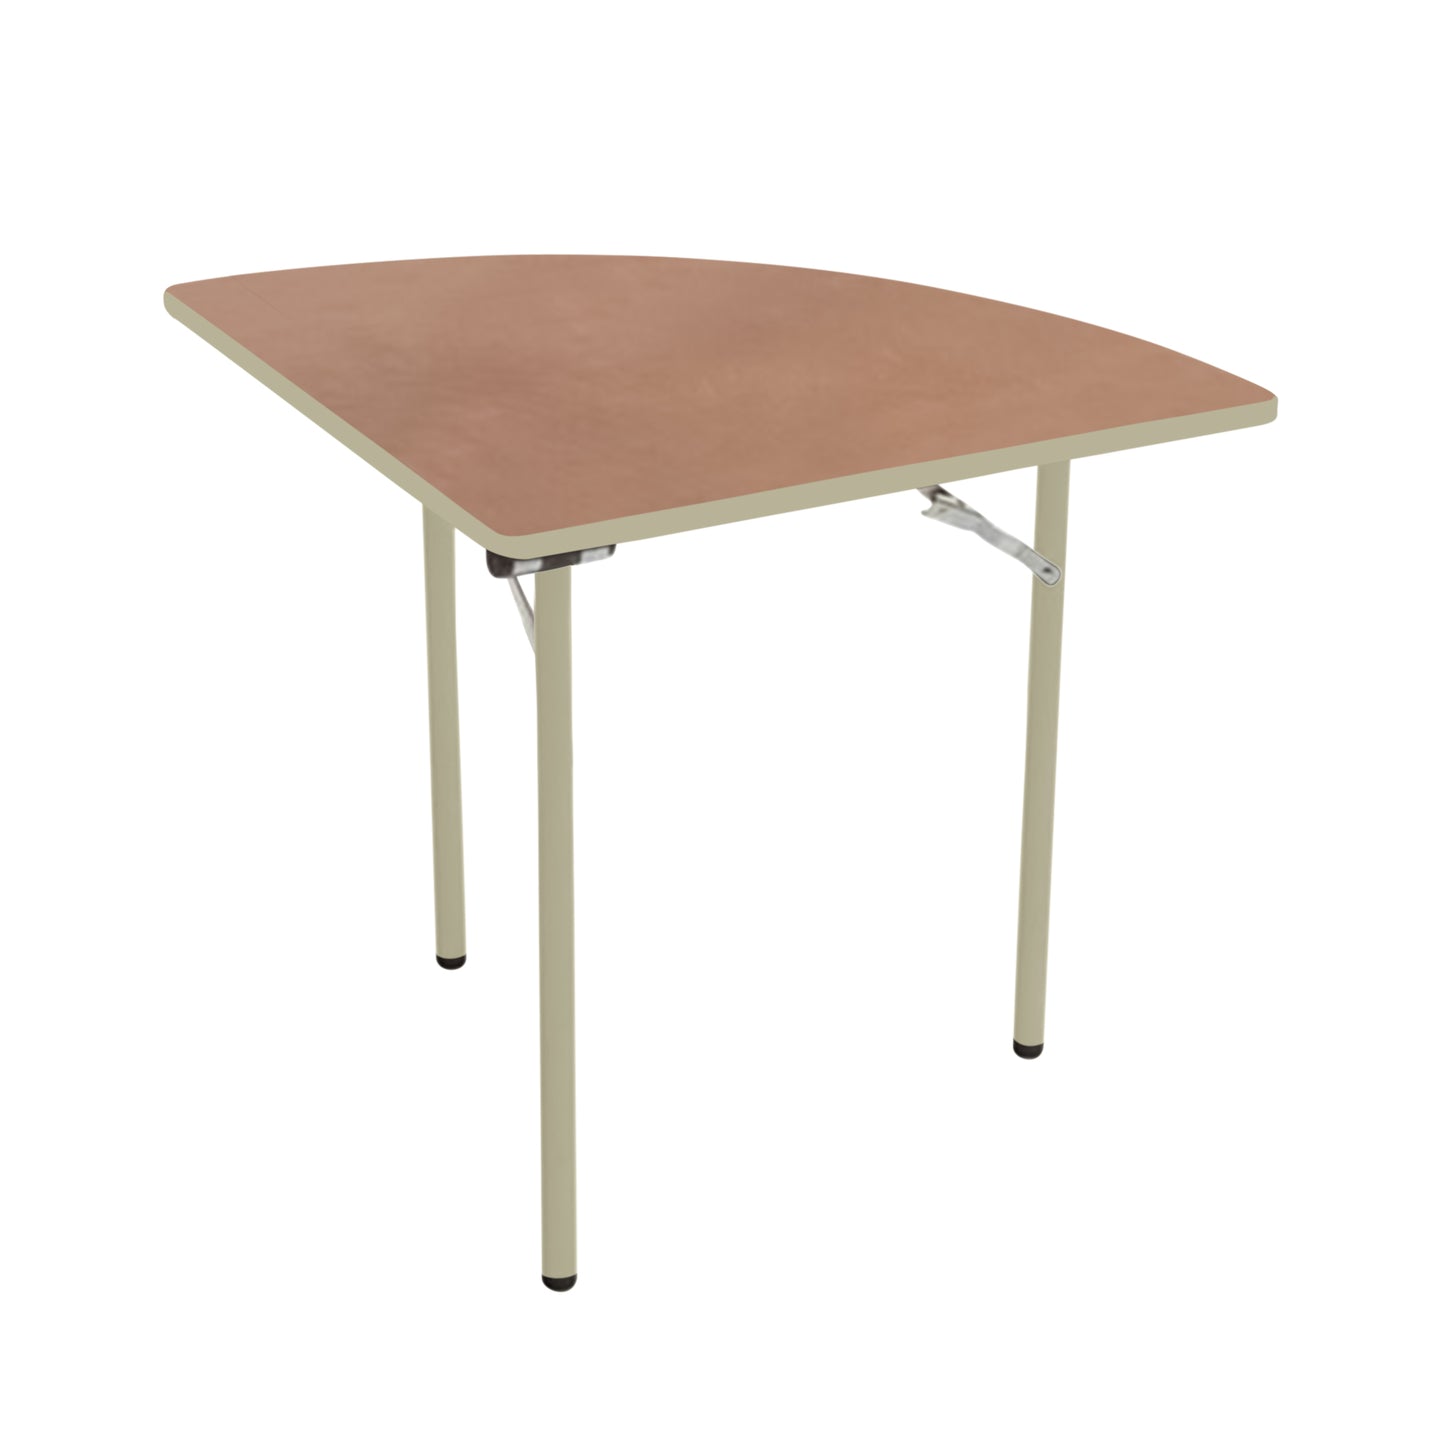 AmTab Folding Table - Plywood Stained and Sealed - Vinyl T-Molding Edge - Quarter Round - Quarter 72" Diameter x 29"H  (AmTab AMT-QR72PM)